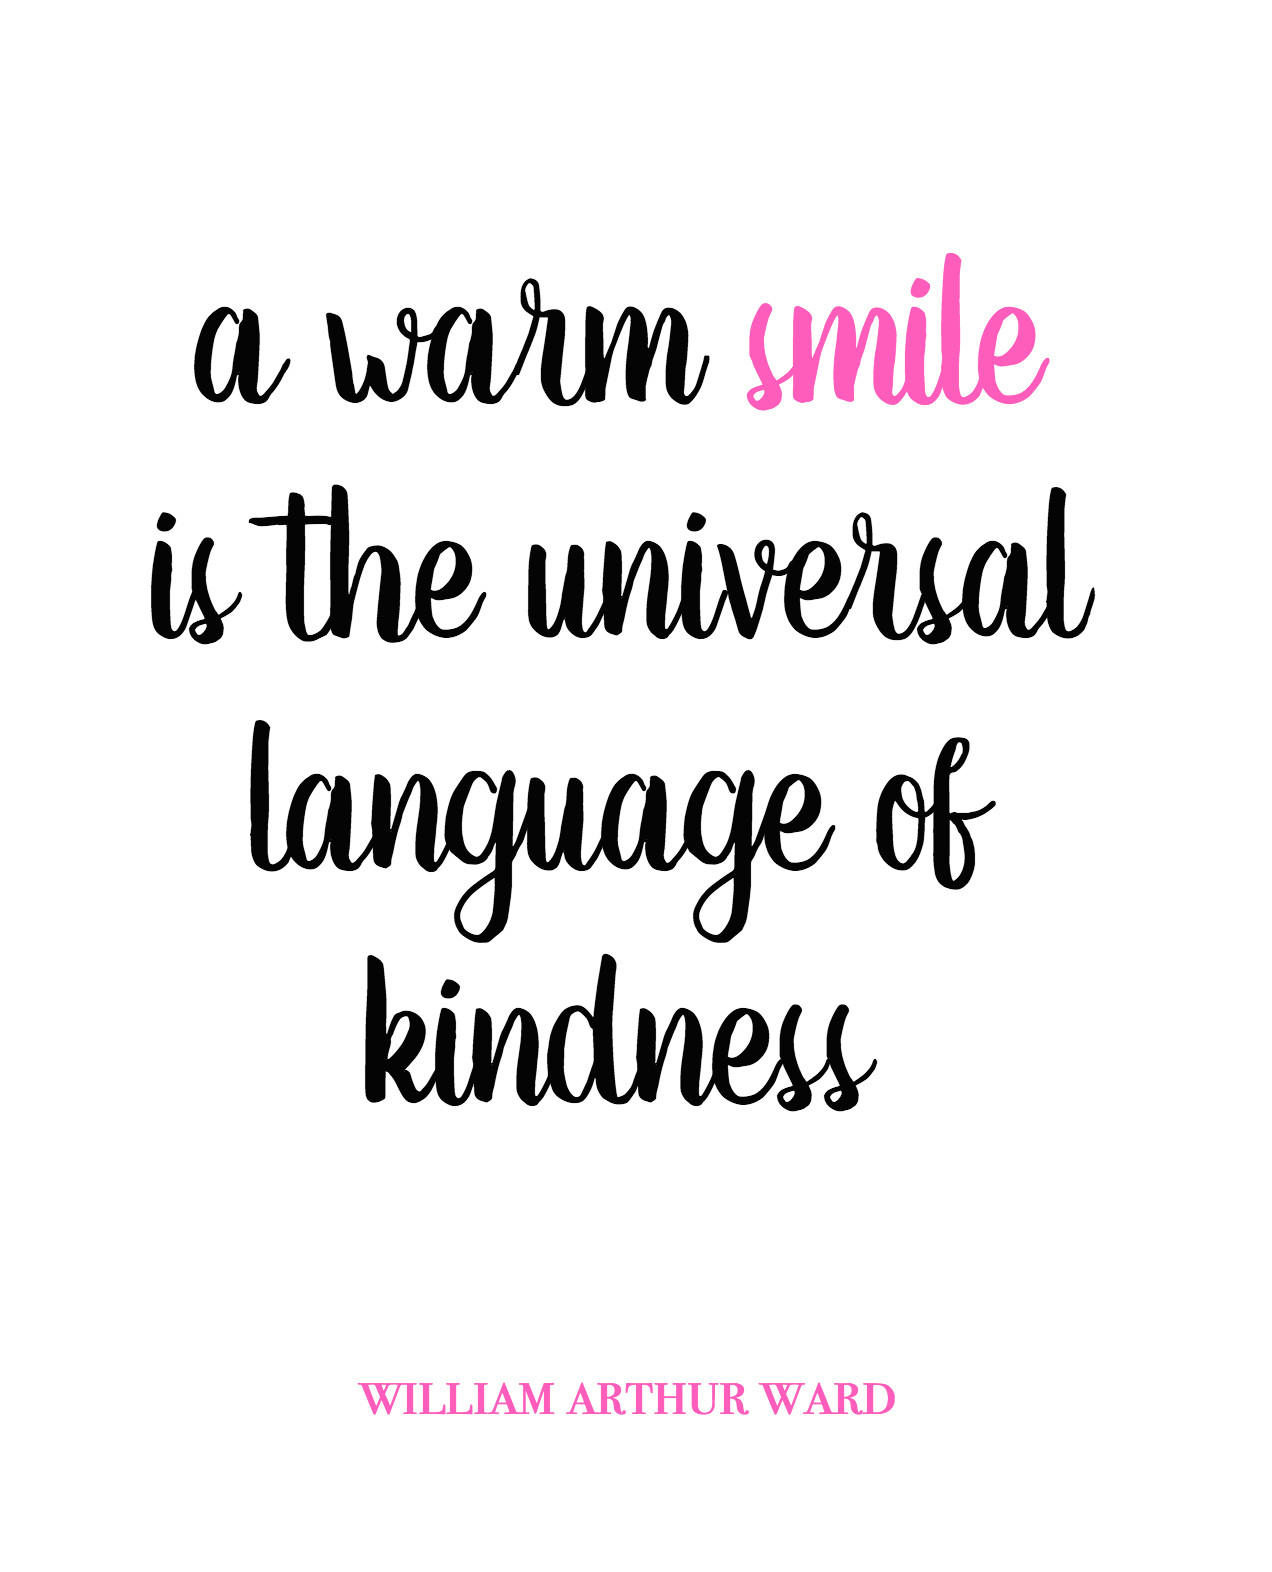 Inspirational Quotes About Smile
 5 Ways Your Digital Influence Can Make a Difference